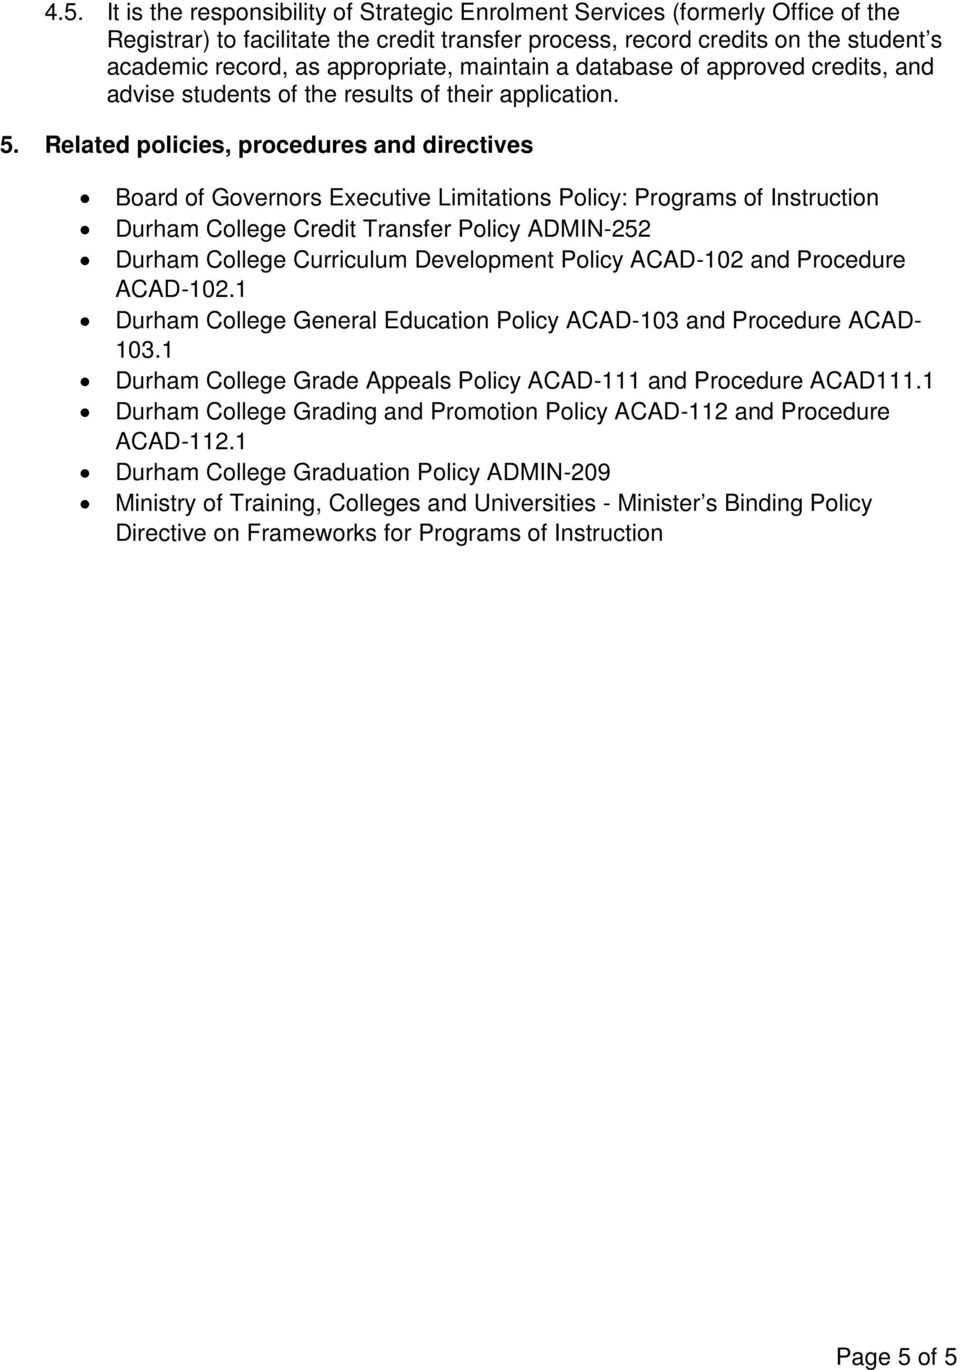 Related policies, procedures and directives Board of Governors Executive Limitations Policy: Programs of Instruction Durham College Credit Transfer Policy ADMIN-252 Durham College Curriculum